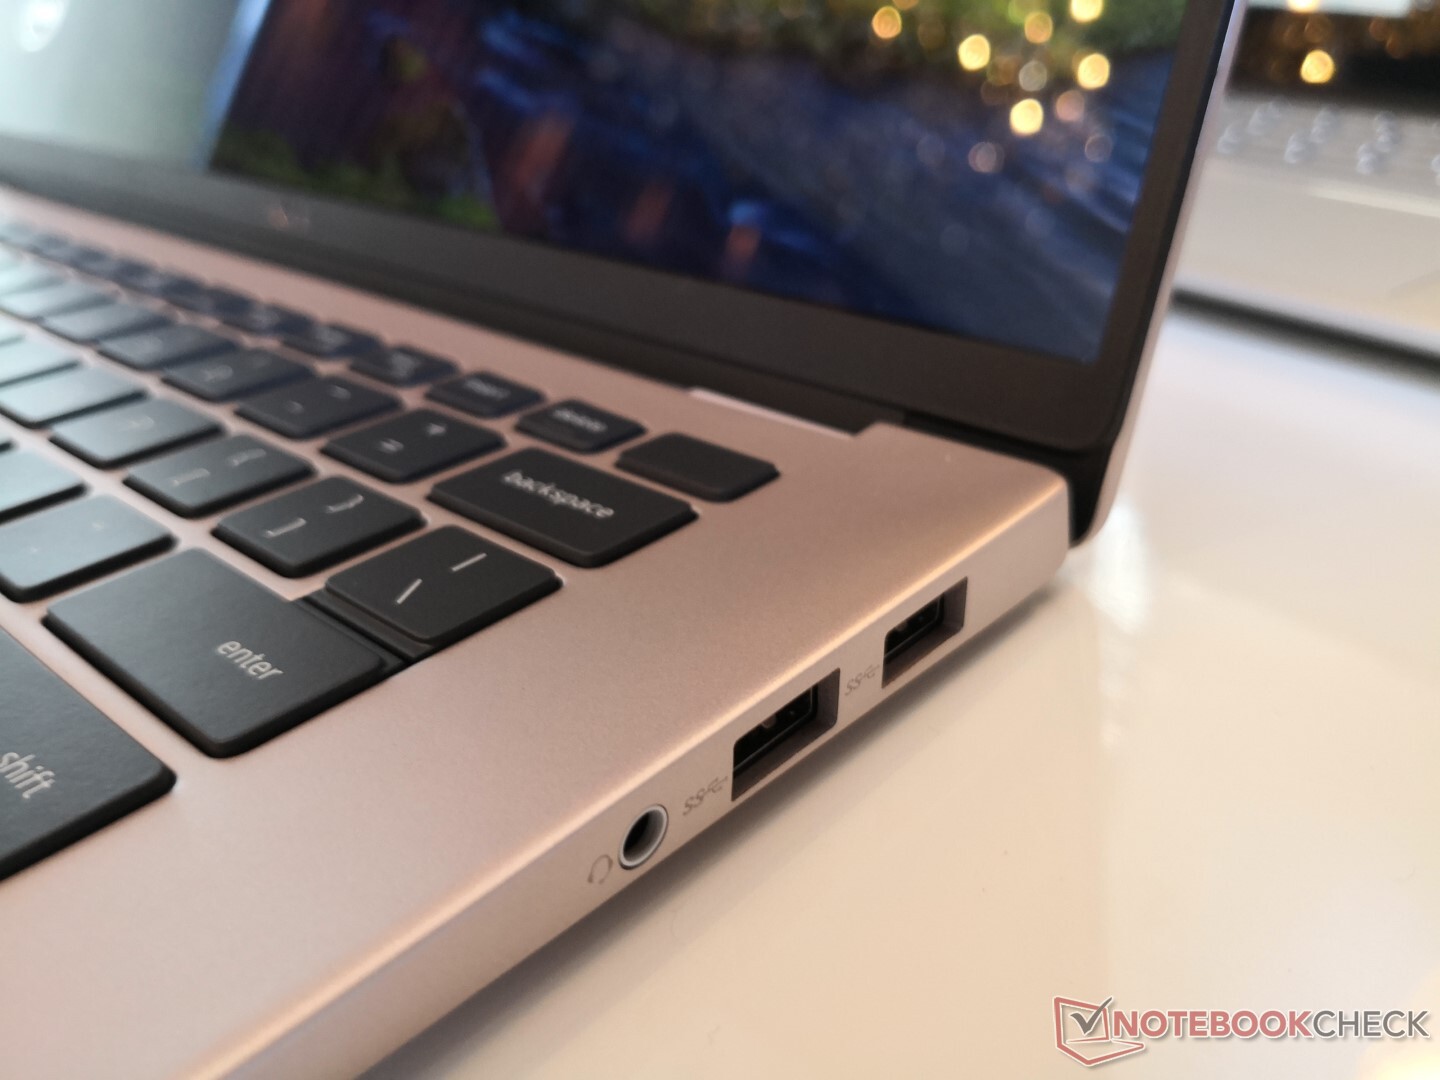 The Inspiron 14 7000 7490 Is Dell S Latest And Most Xps Like Laptop Yet In Both Looks And Features Notebookcheck Net News